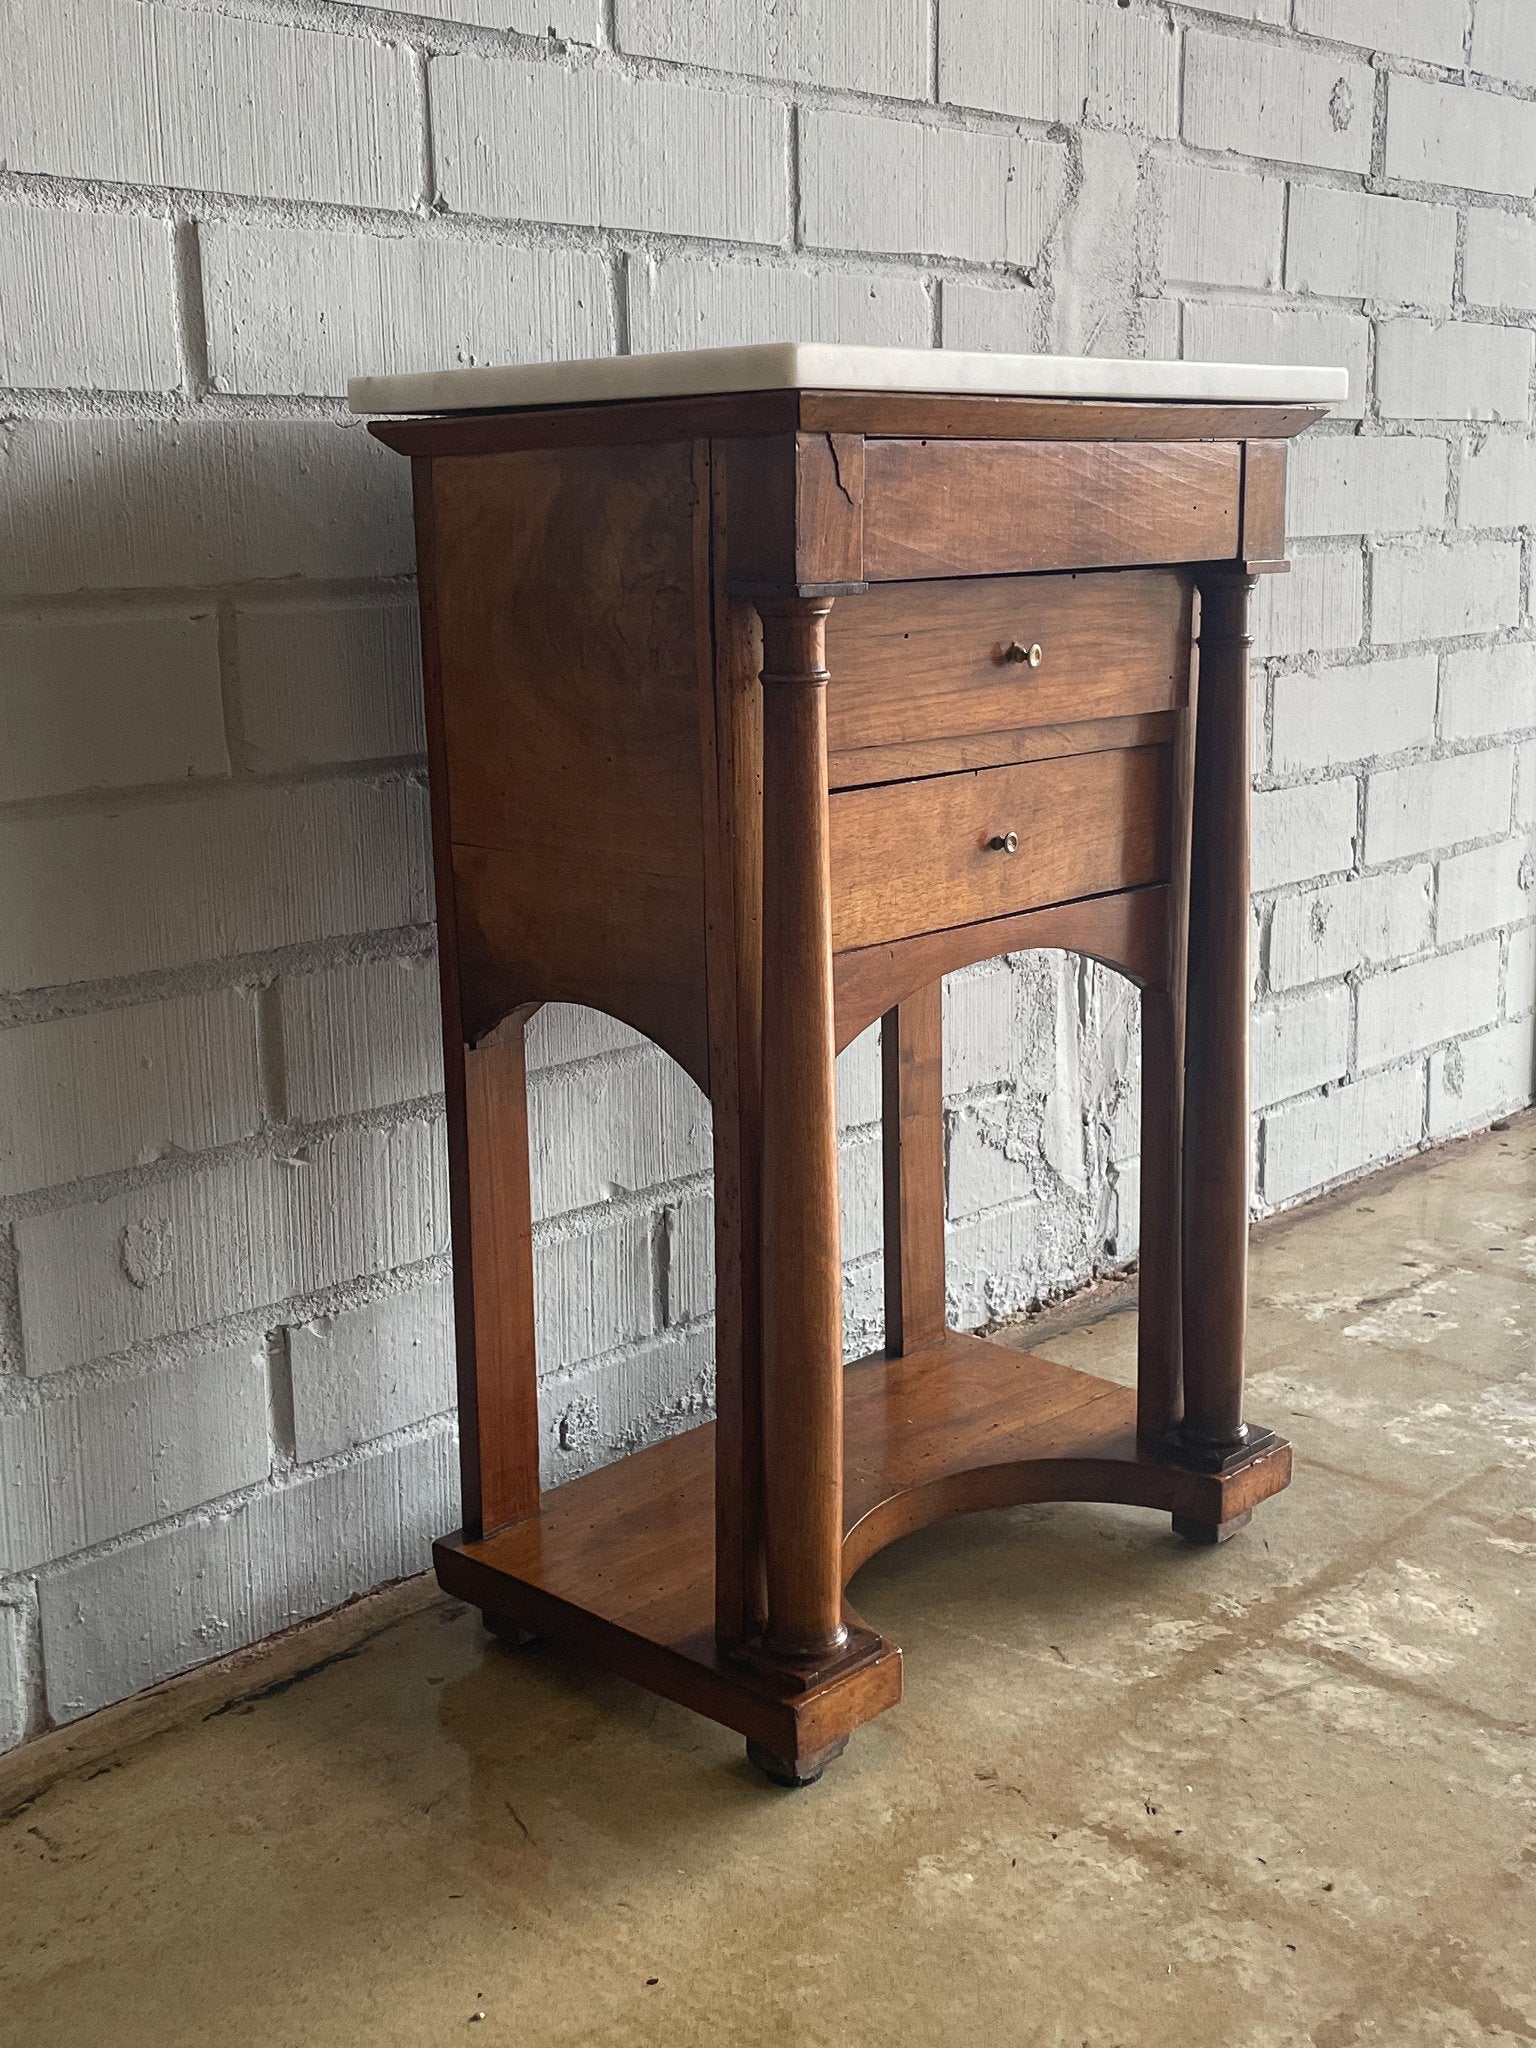 ANTIQUE SIDE TABLE WITH WHITE MARBLE TOP